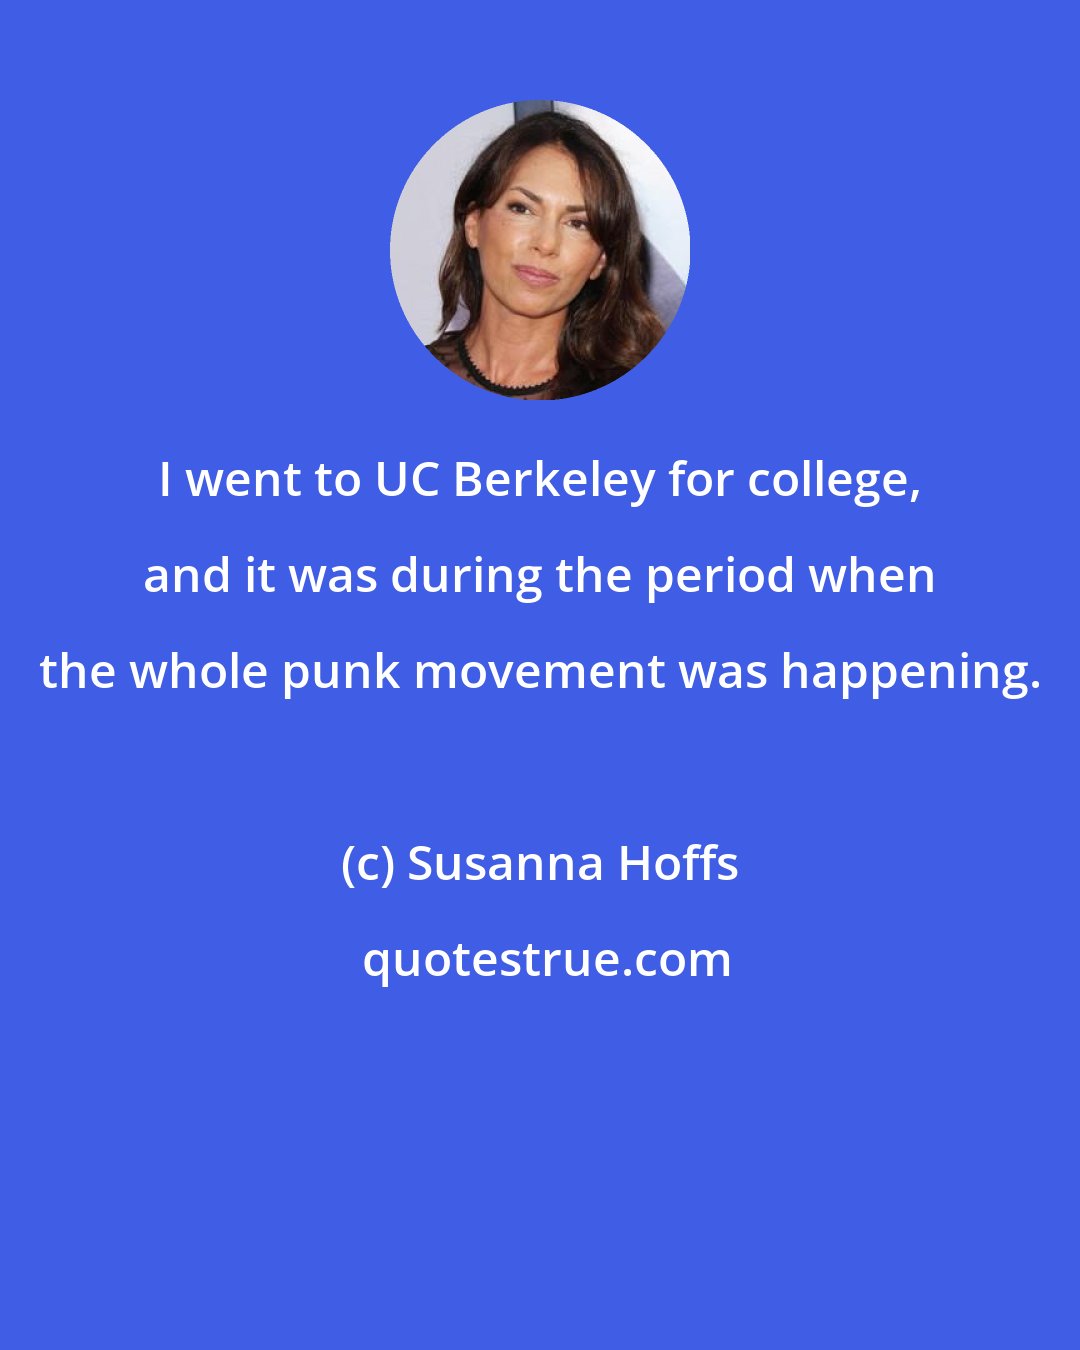 Susanna Hoffs: I went to UC Berkeley for college, and it was during the period when the whole punk movement was happening.